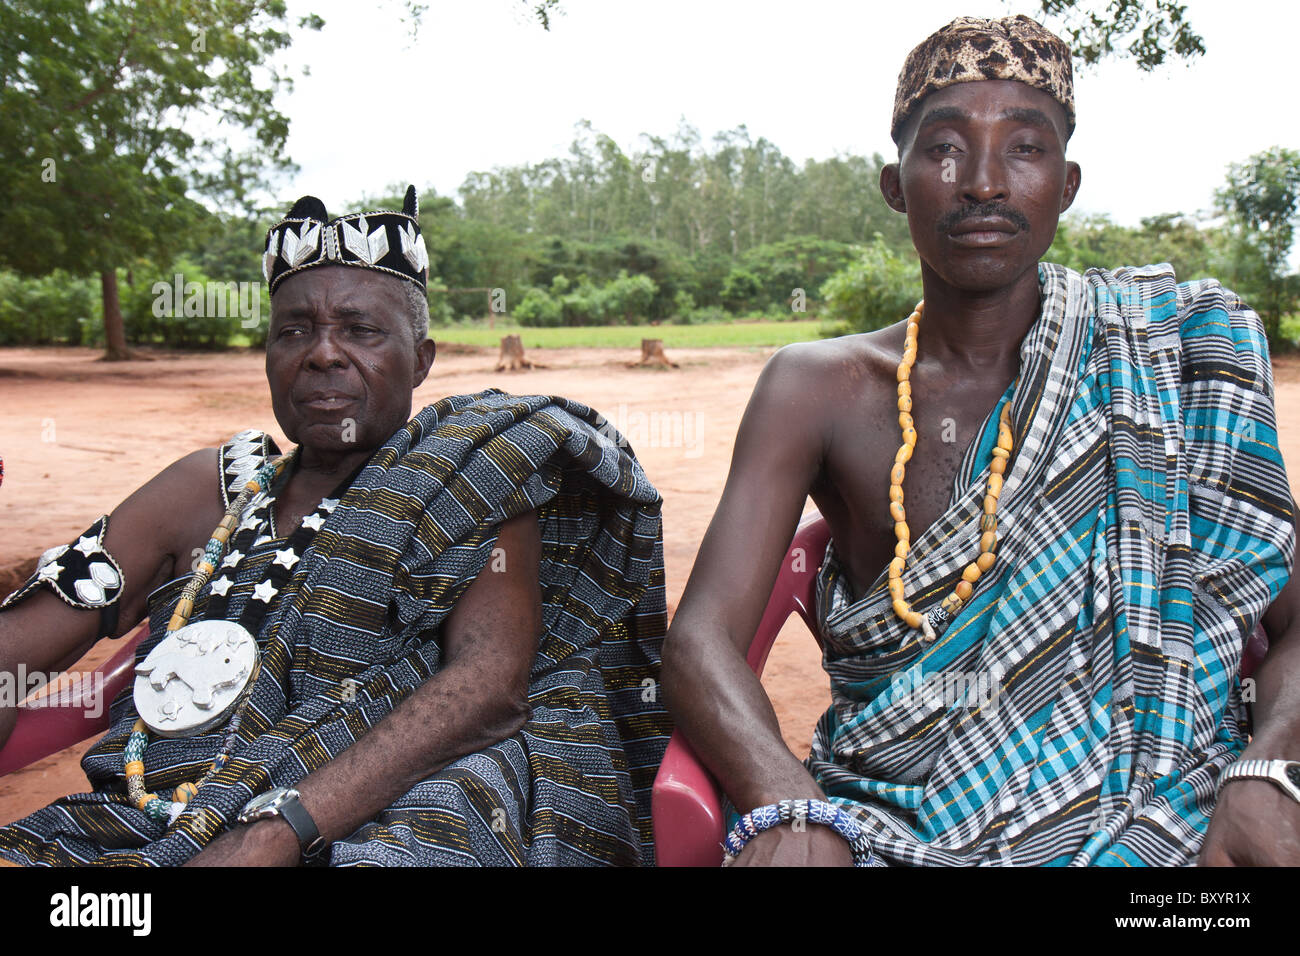 A local chief of the Esse minority people group bedecked with crown and other entrapments befitting royalty in rural West Africa. Stock Photo